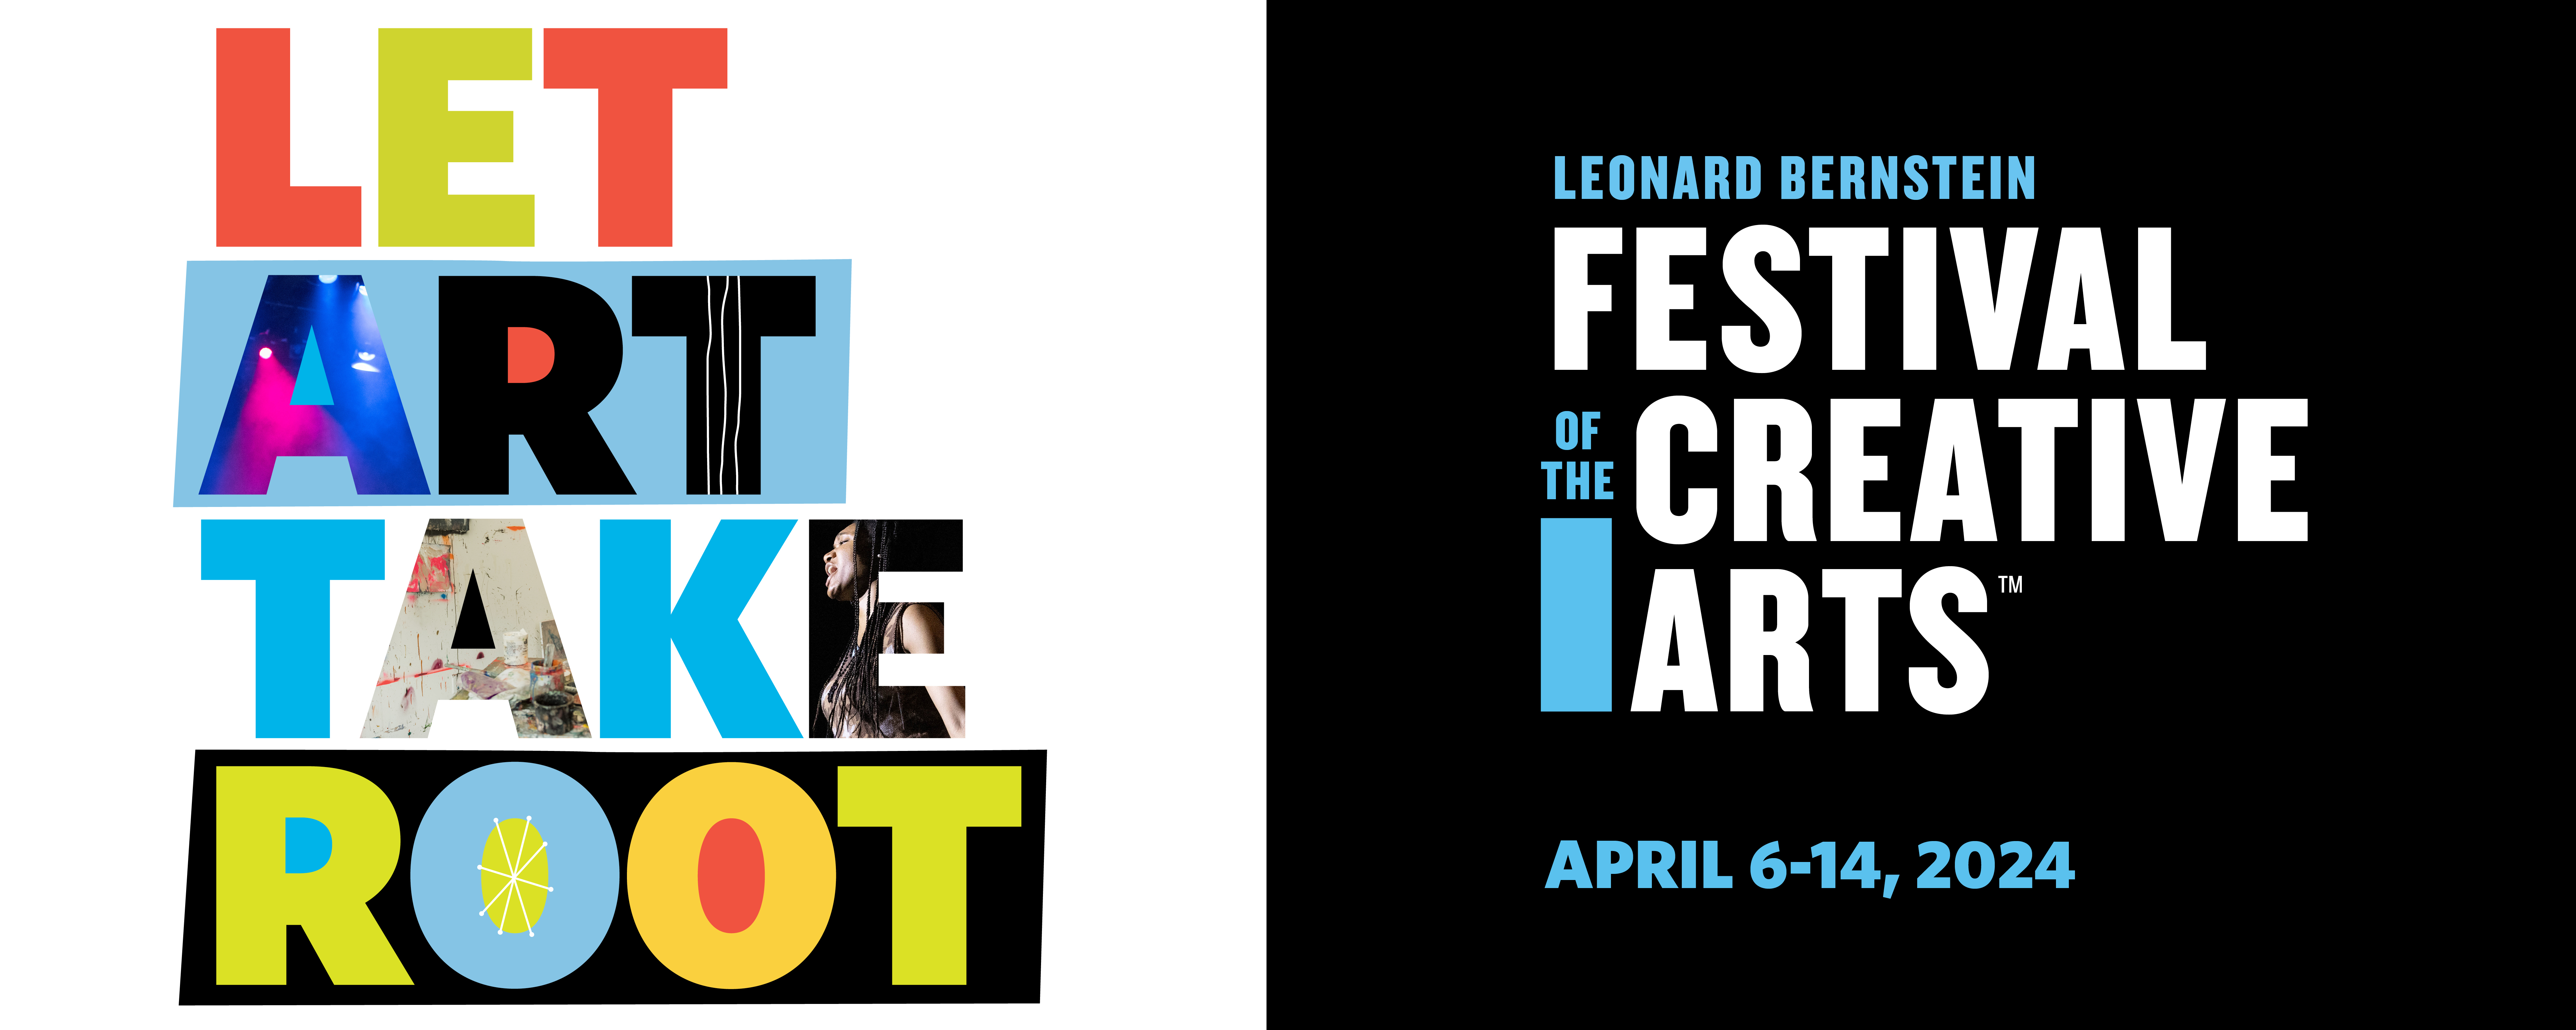 text reads "Let Art Take Root | Leonard Bernstein Festival of the Creative Arts, April 6-14, 2024